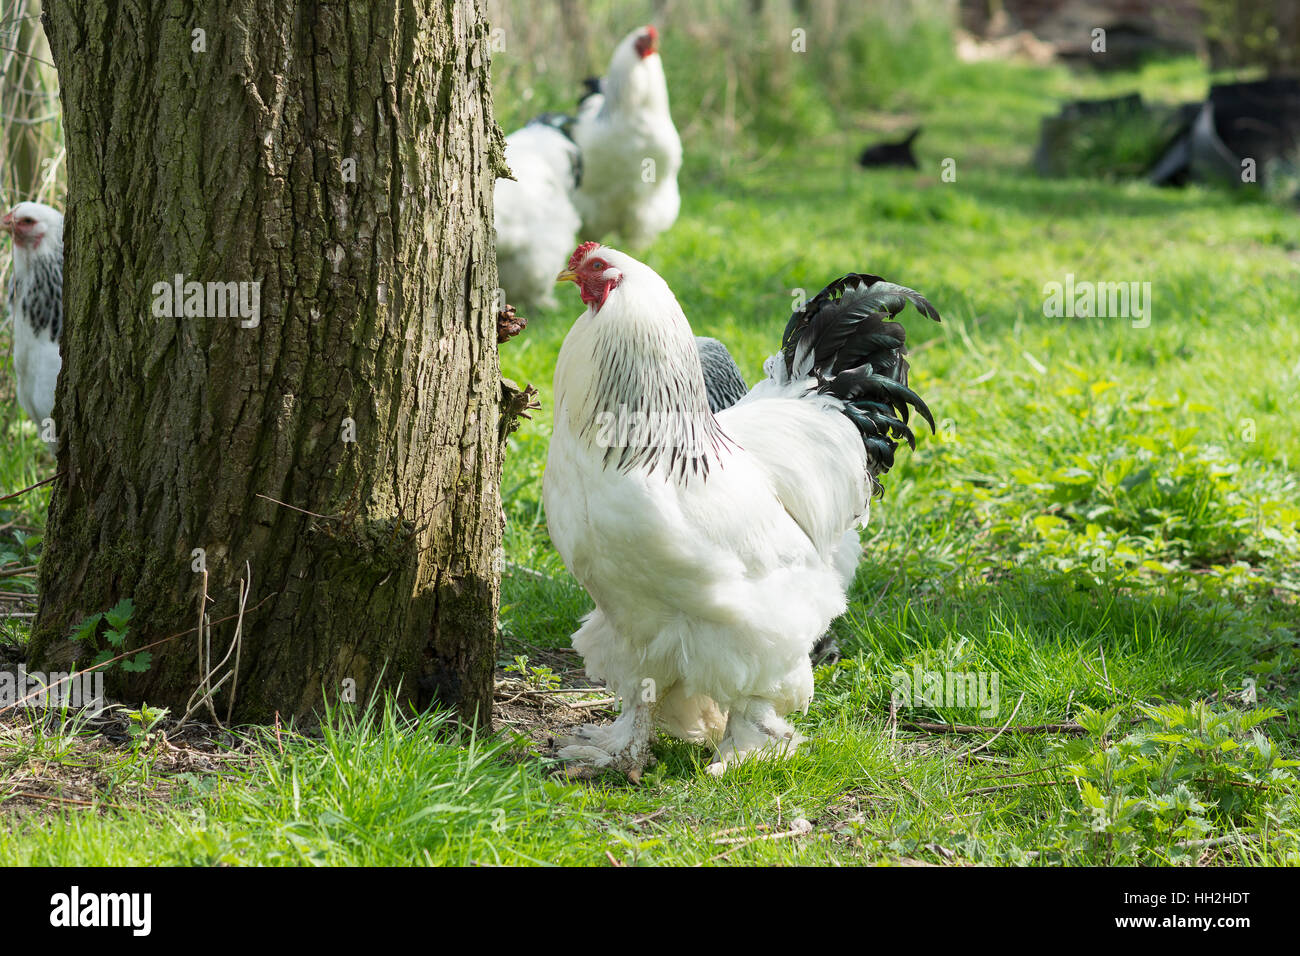 Updated pictures of my Isabel - Brahma Drama Poultry Farm